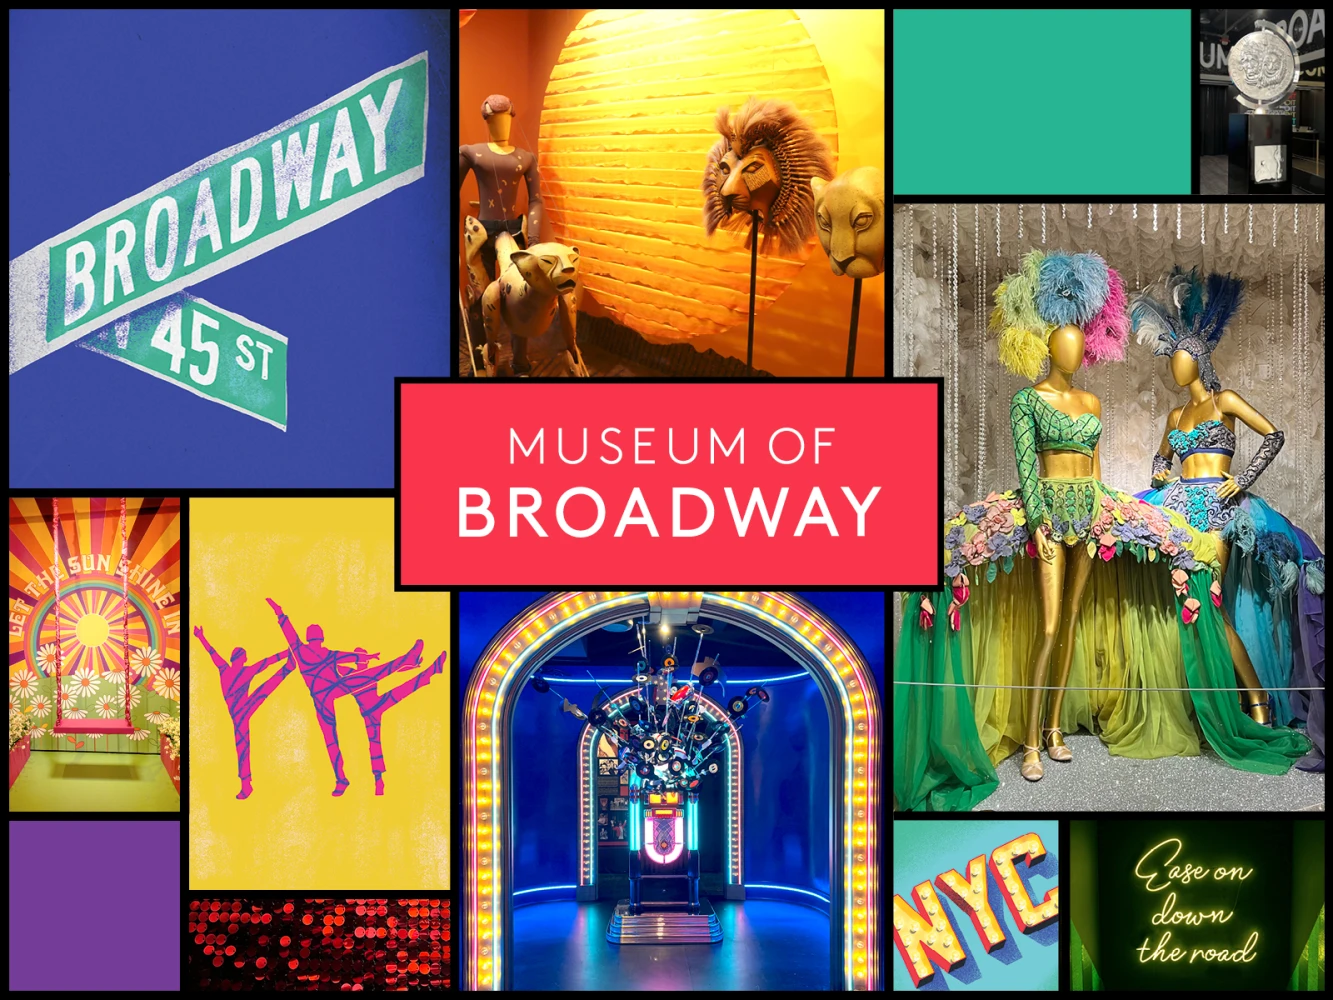 The Museum of Broadway: What to expect - 9